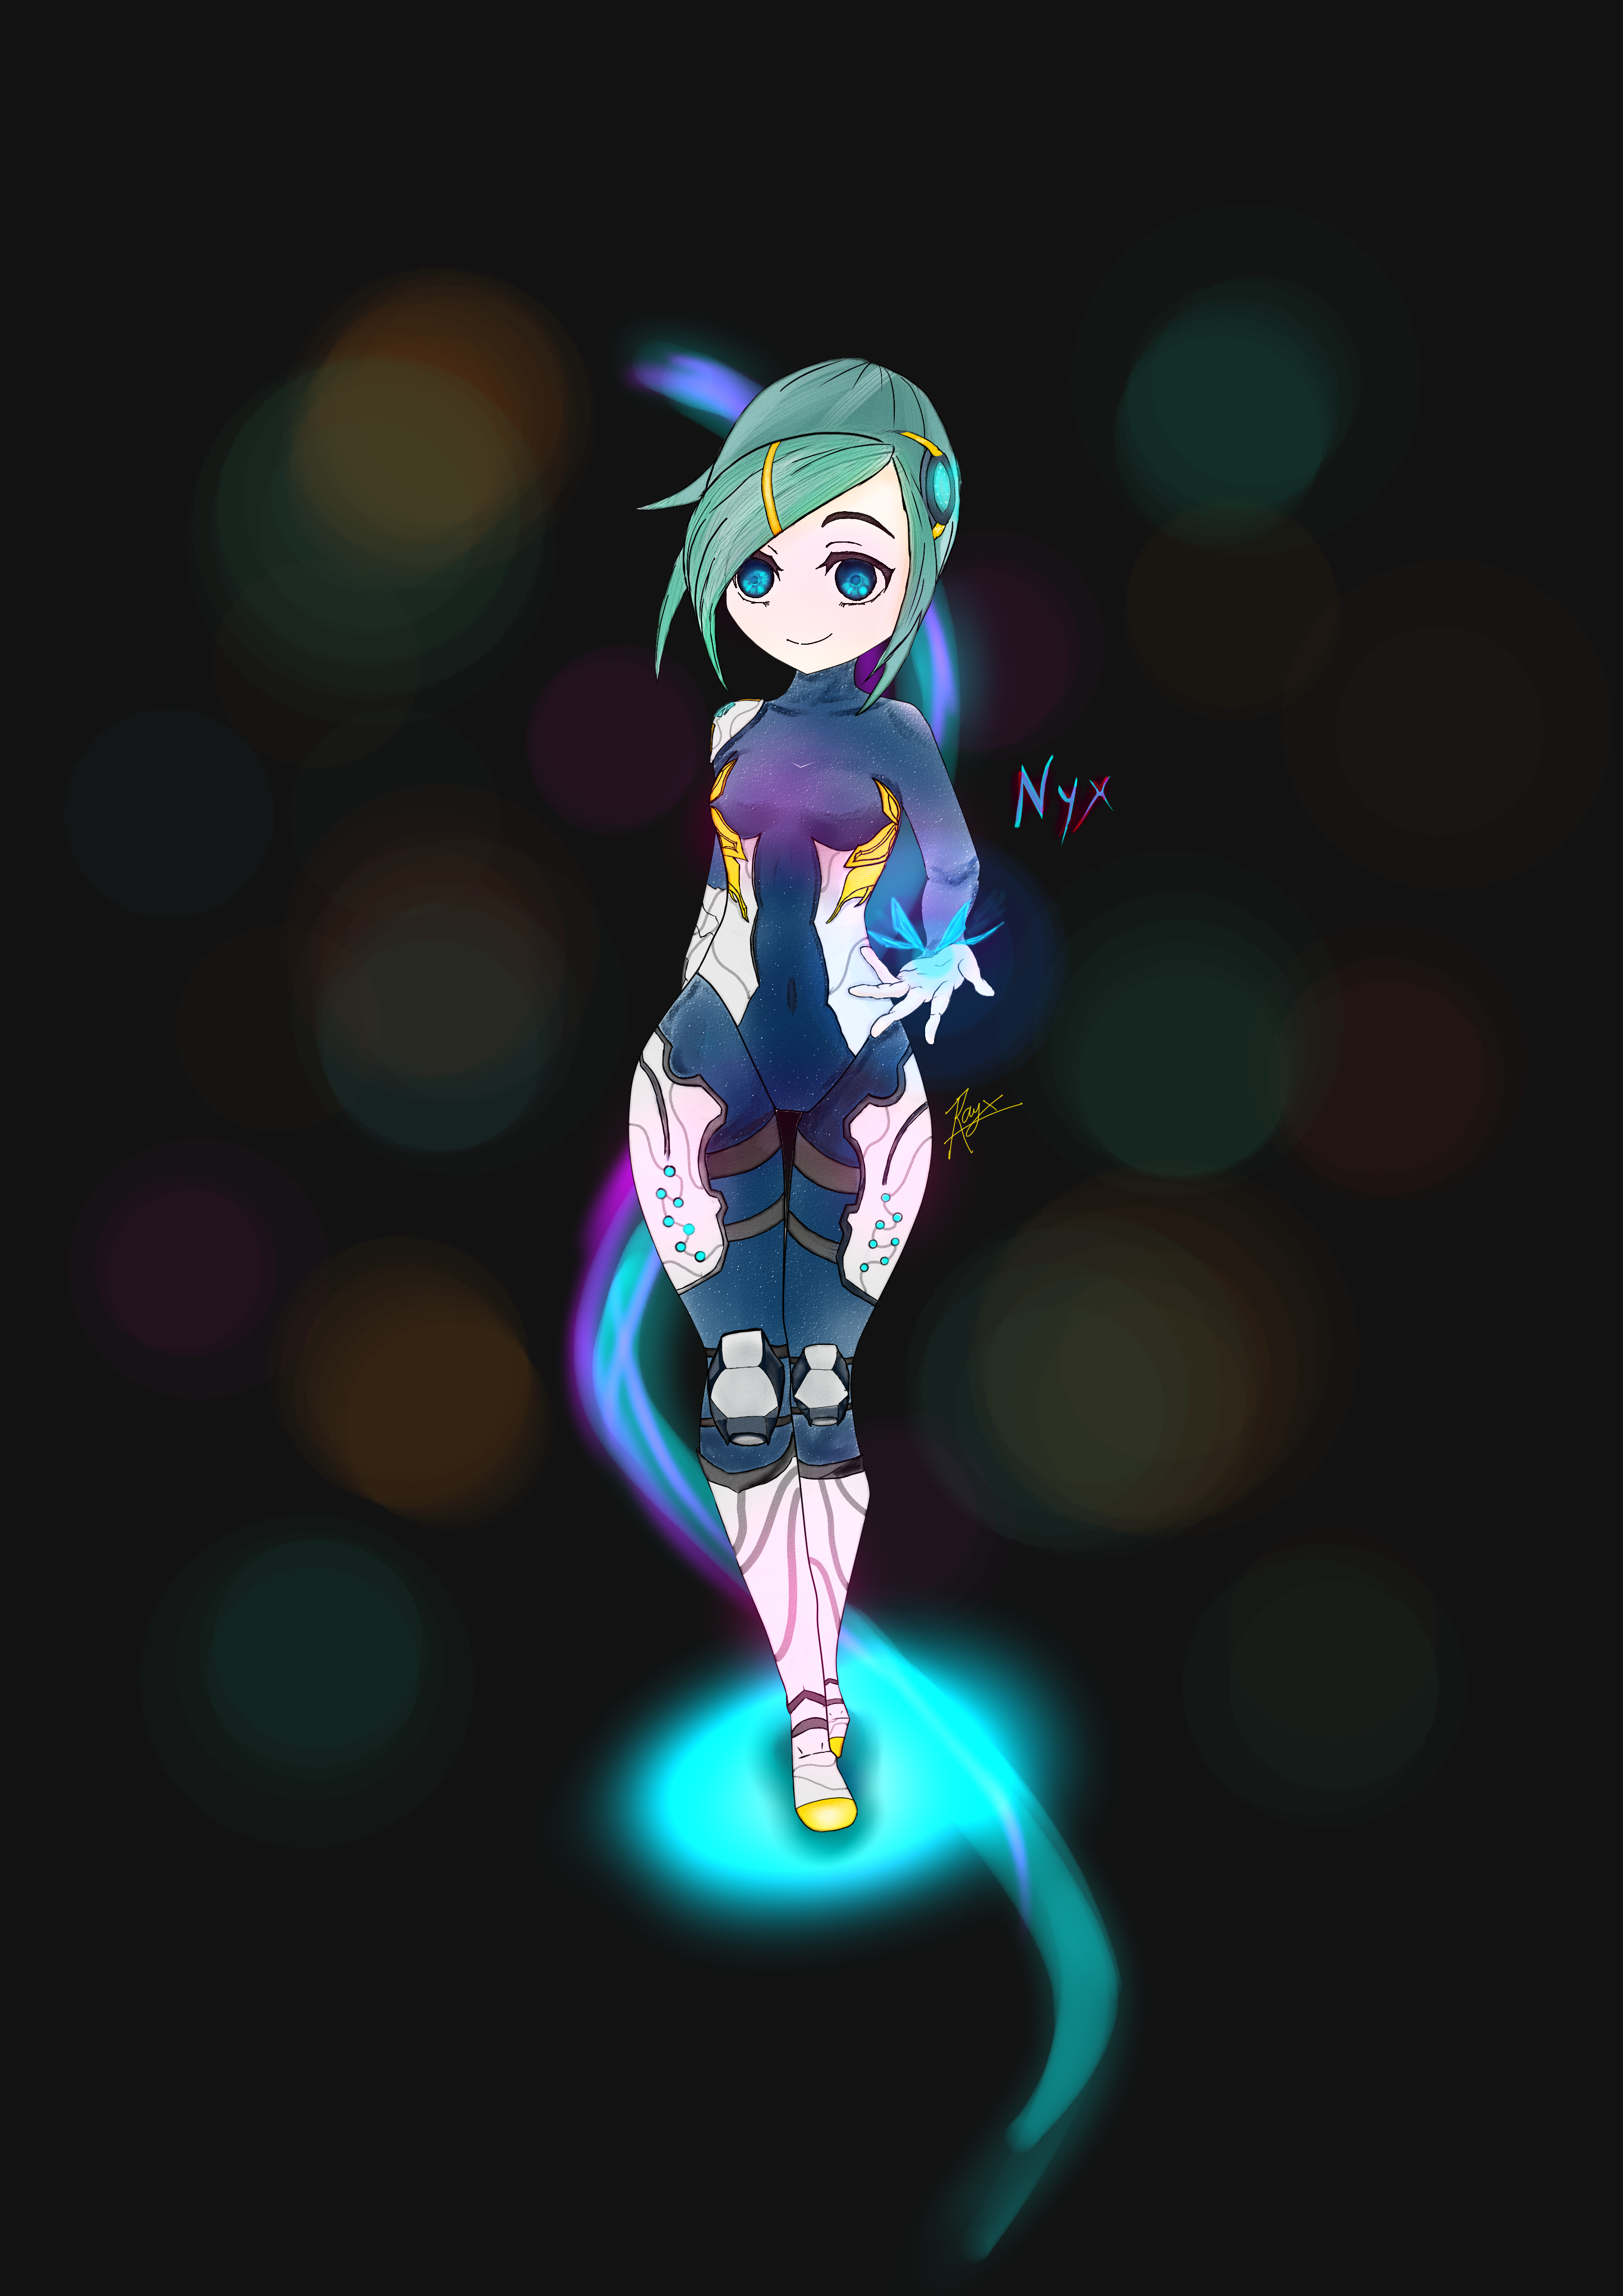 nyx_by_rayxrevive-dcd5dgz.png